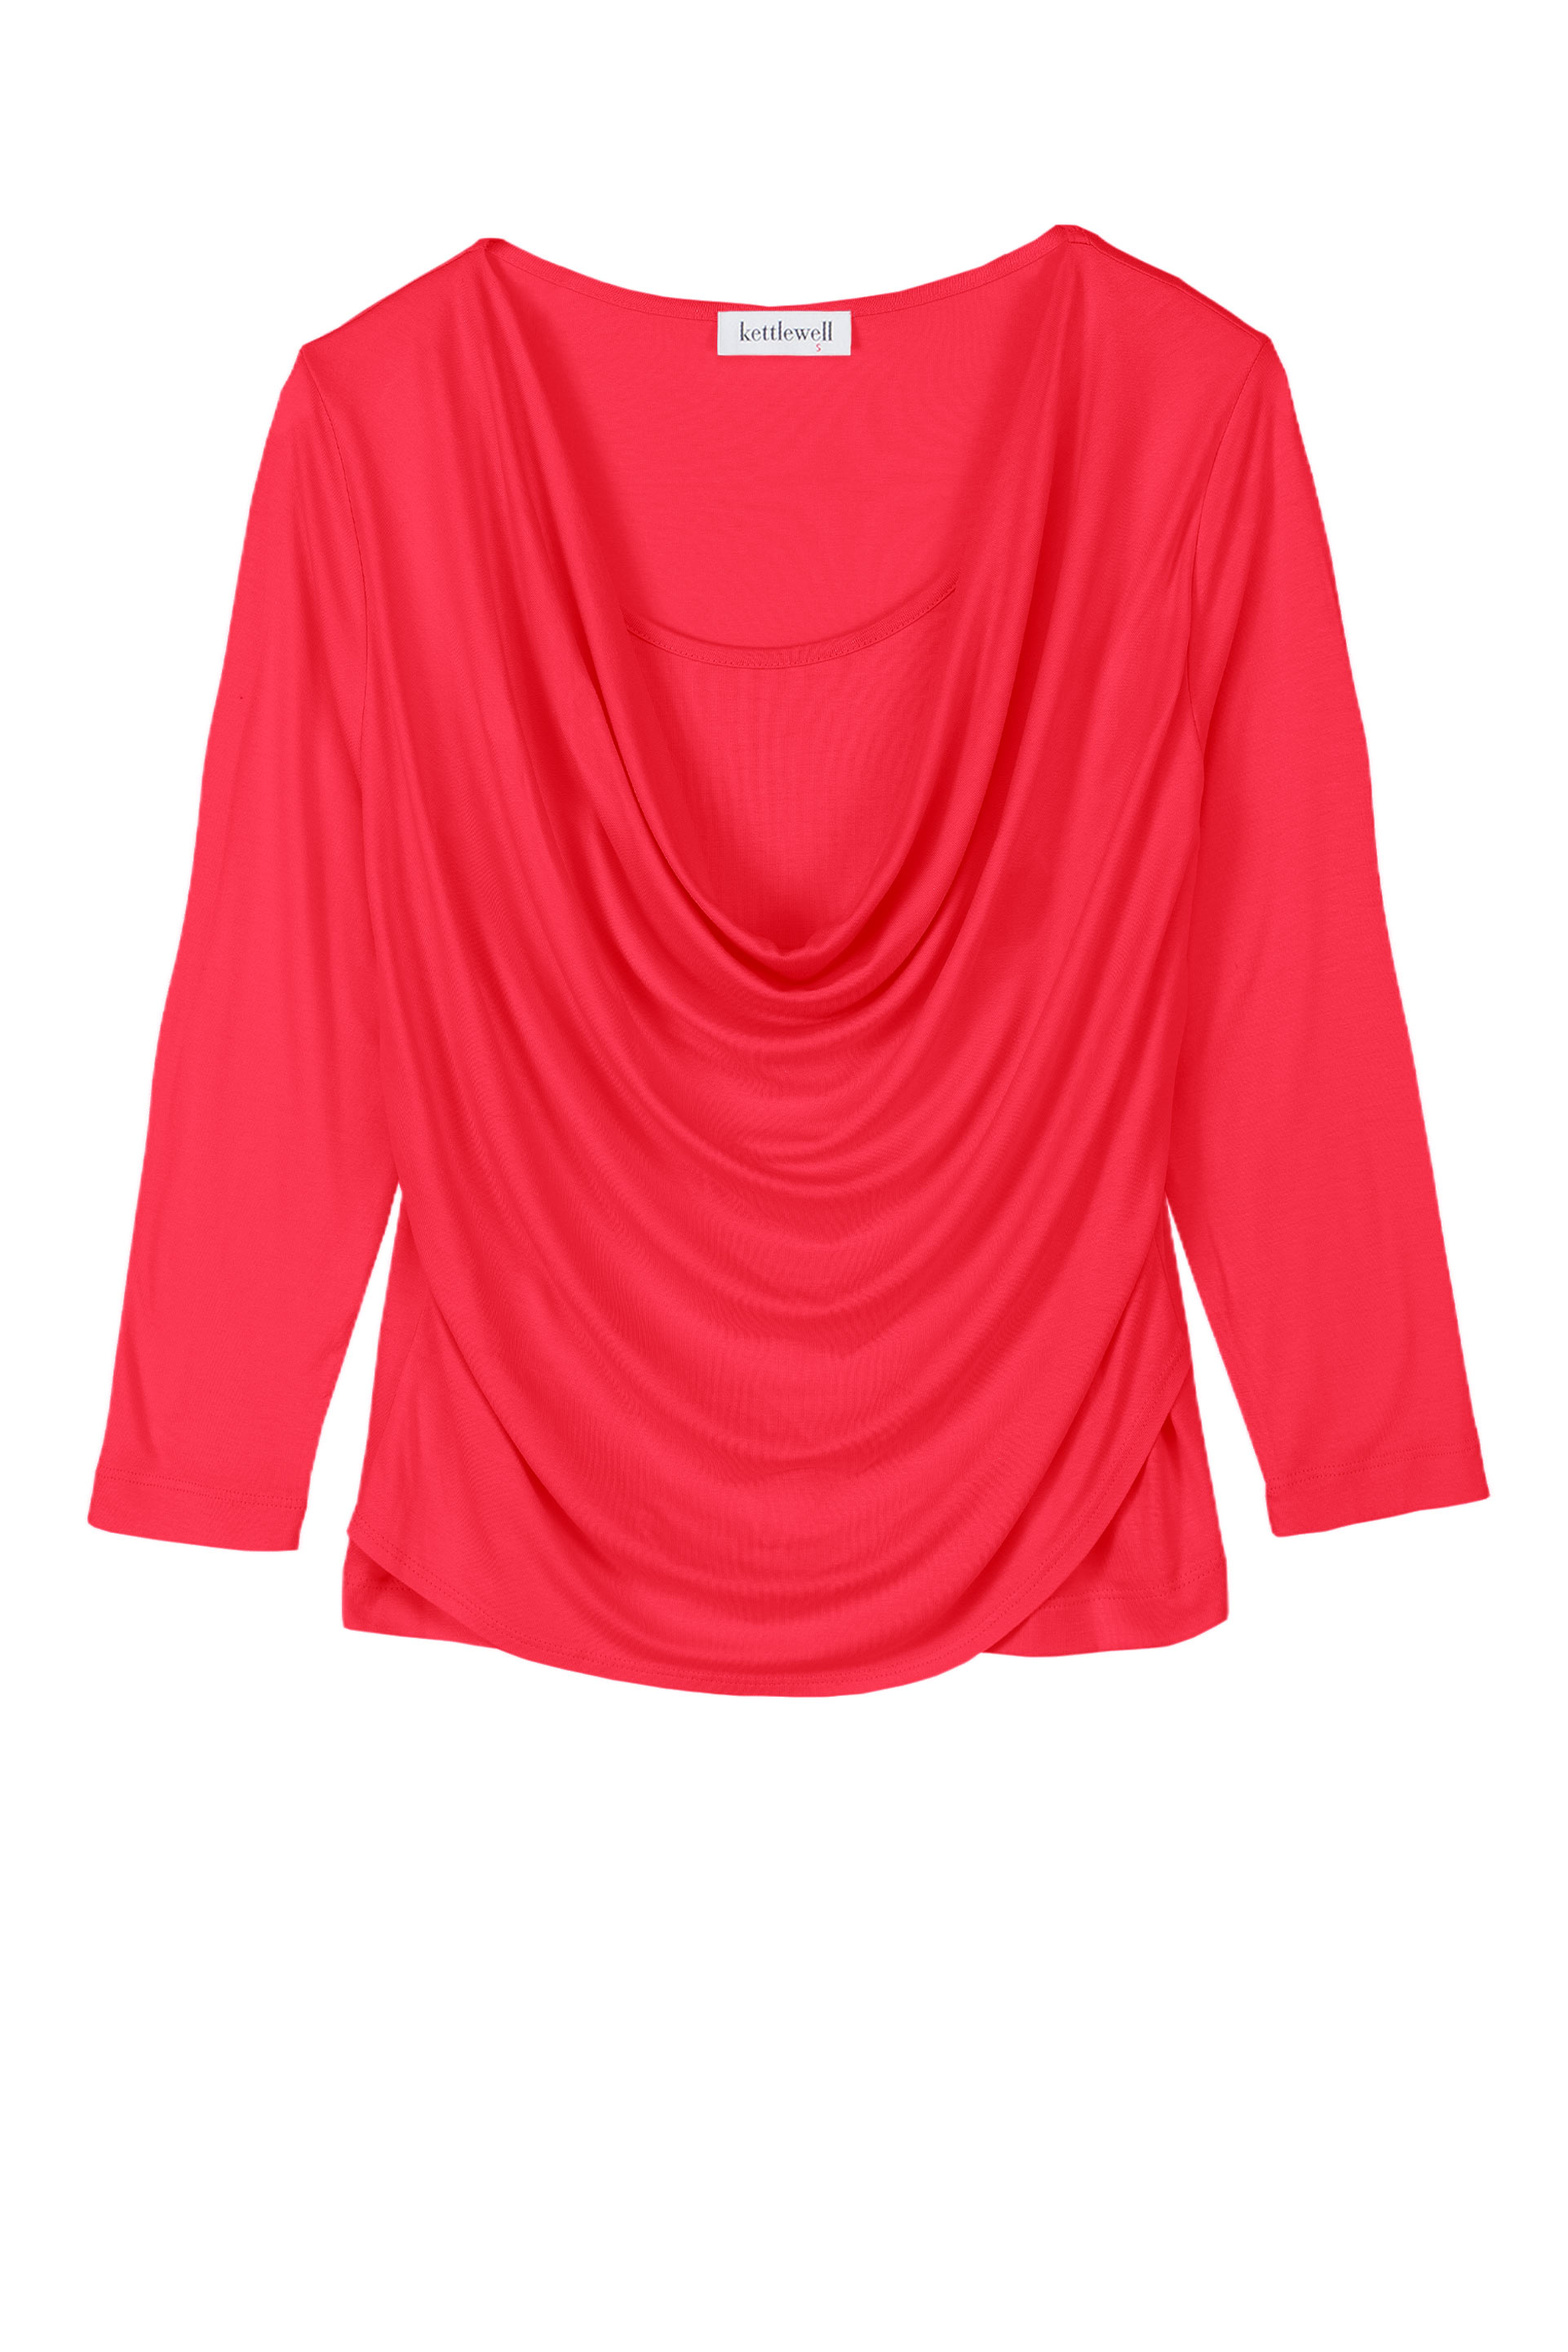 97122-alicia_cowl_34_sleeve_red_coral.jpg